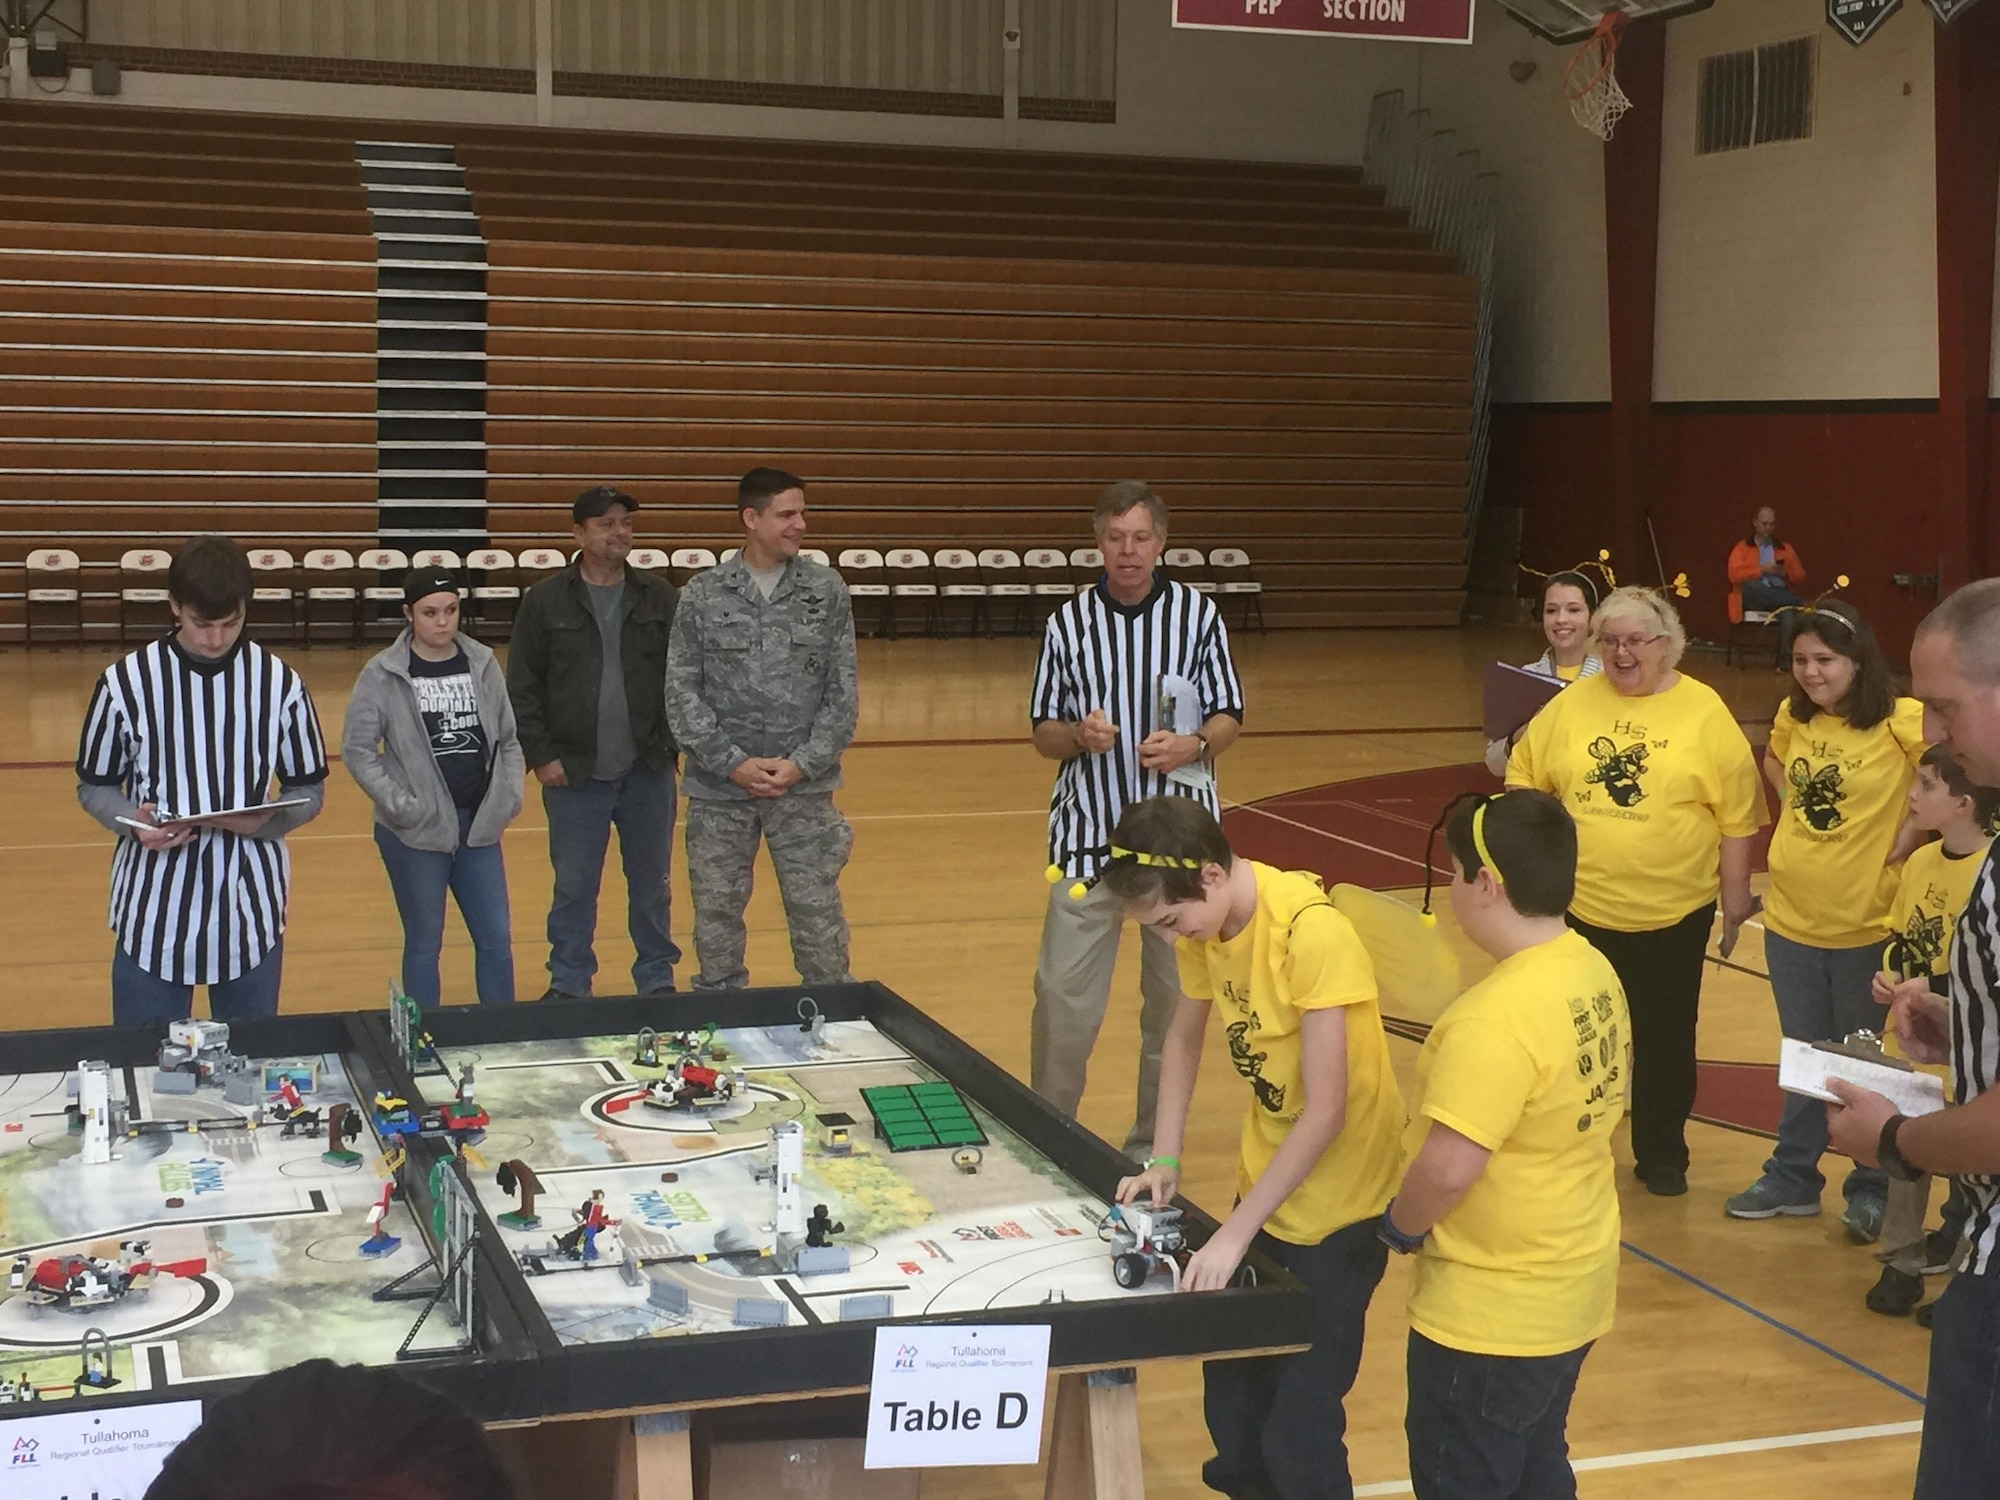 Sean O’Gorman and Jamison Norton (left to right at table), on the LegoTronics team from East Middle School, Tullahoma, prepare their team’s robot to complete a FIRST® LEGO® League (FLL) mission. Twenty-seven teams gathered at Tullahoma High School Dec. 17, 2016, to compete in the FLL Regional Qualifier Tournament.  (U.S. Air Force photo/Holly Peterson)